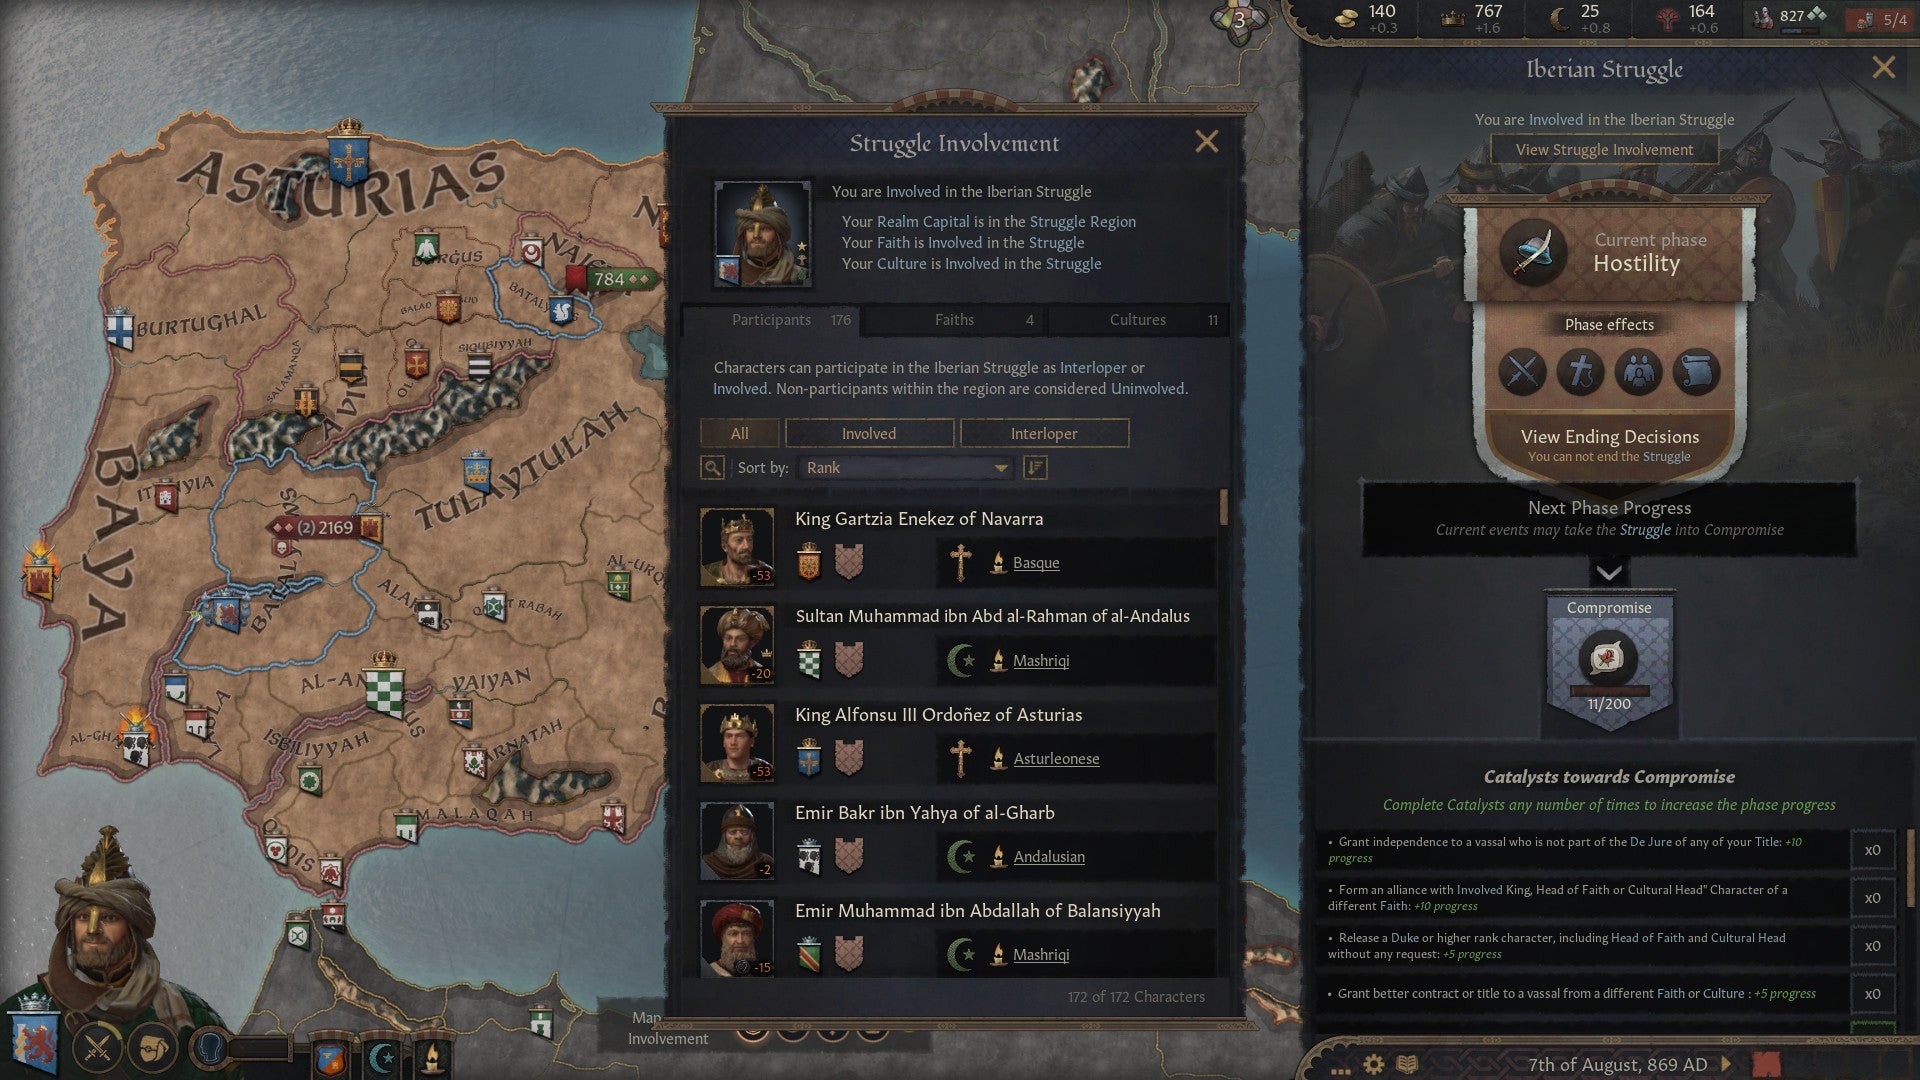 Crusader Kings 3 Fates of Iberia introduces a new system called Struggles